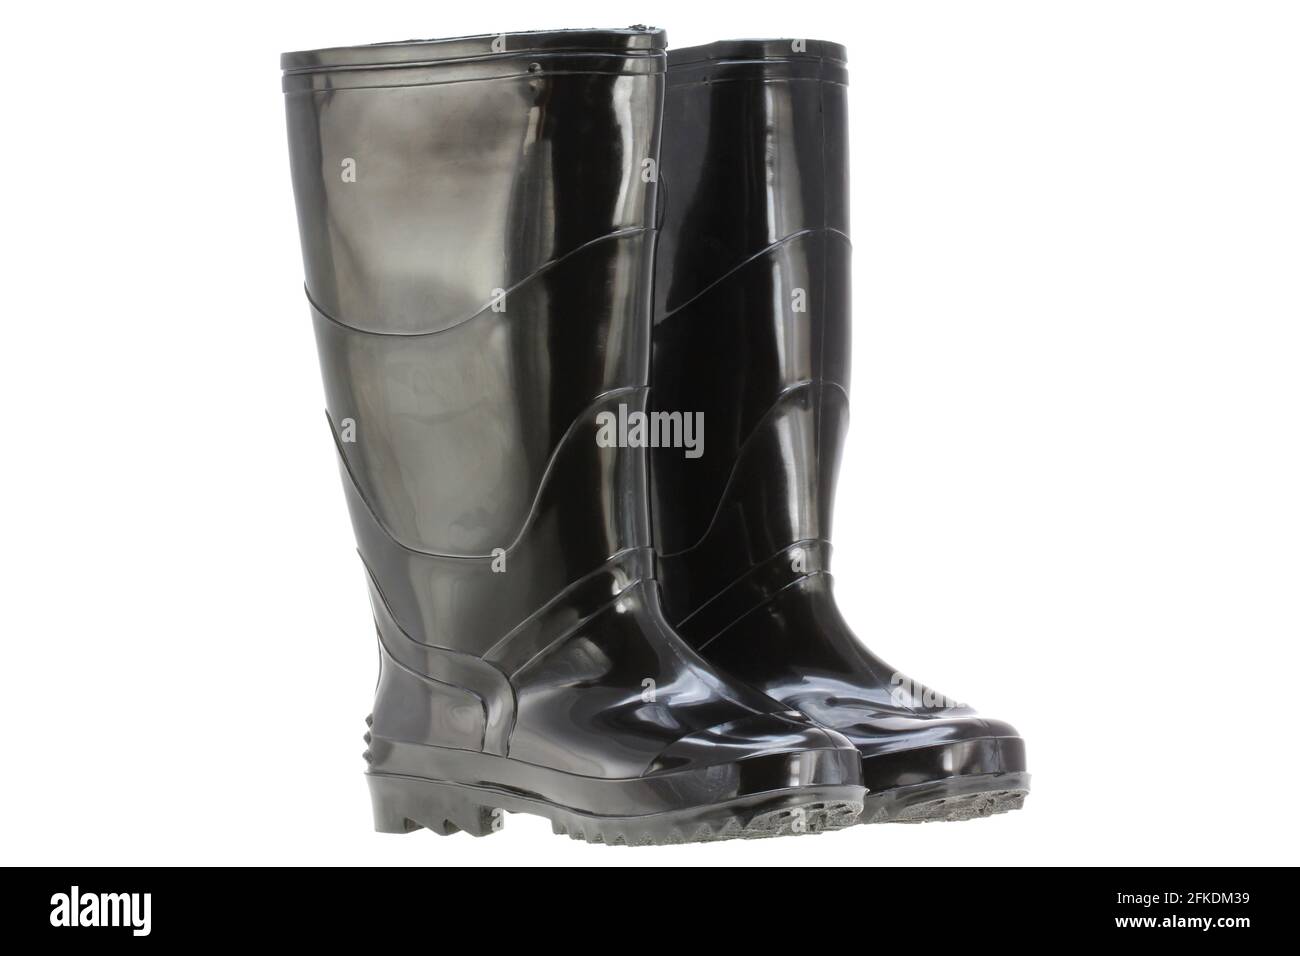 A pair of Black Rain boots (Rubber boots), made of Elastic PVC/ Plastic Stock Photo